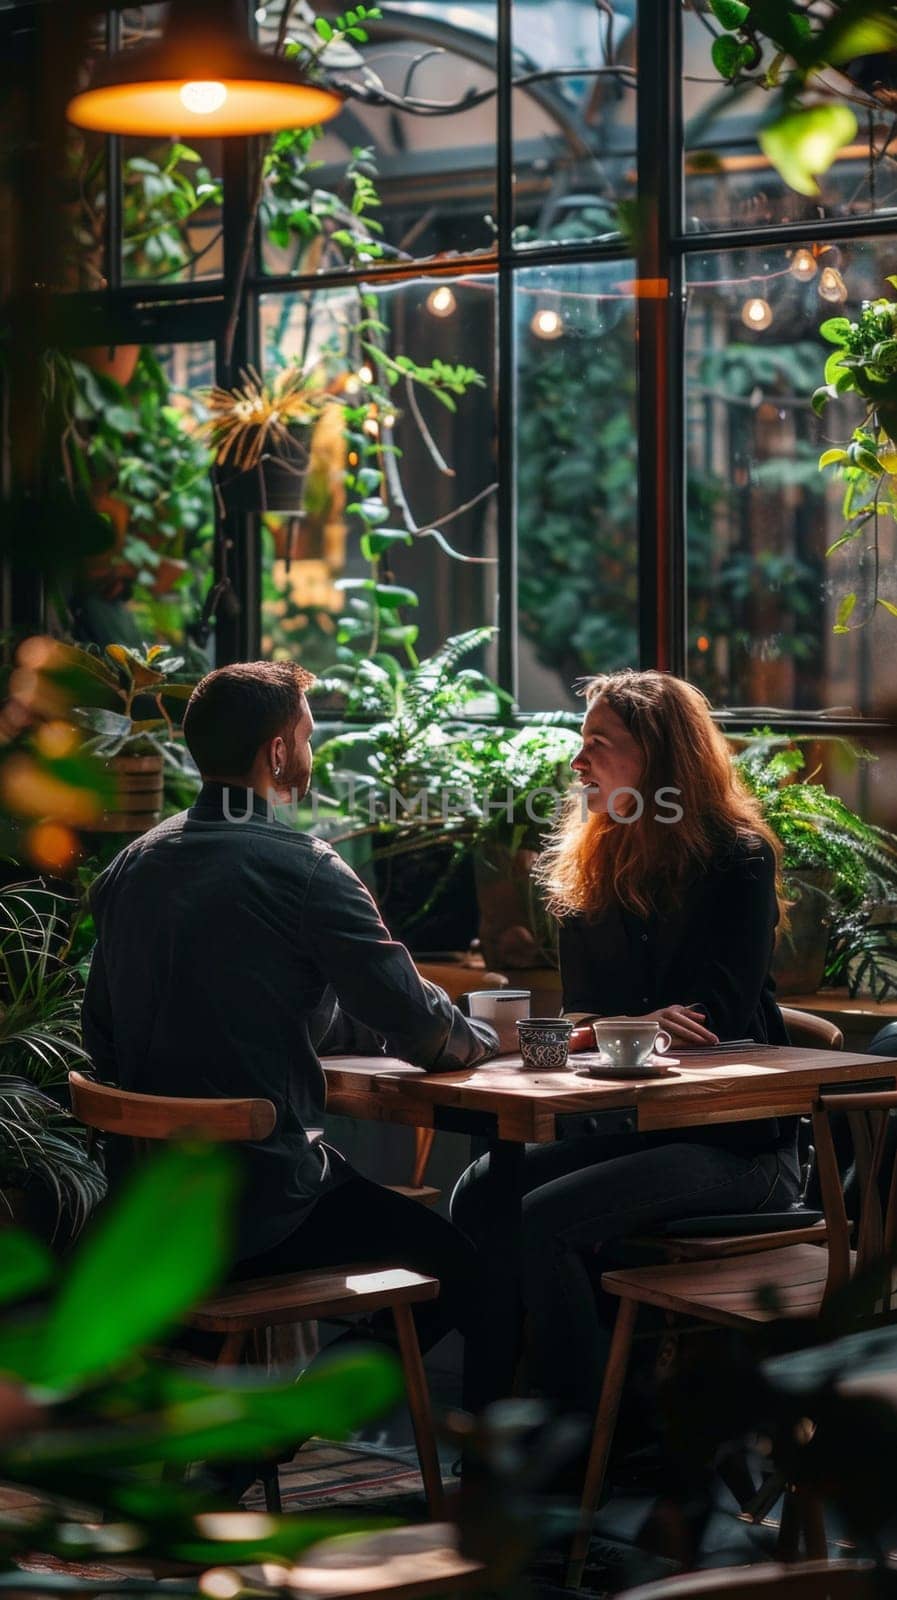 A couple sitting at a table in front of plants and trees